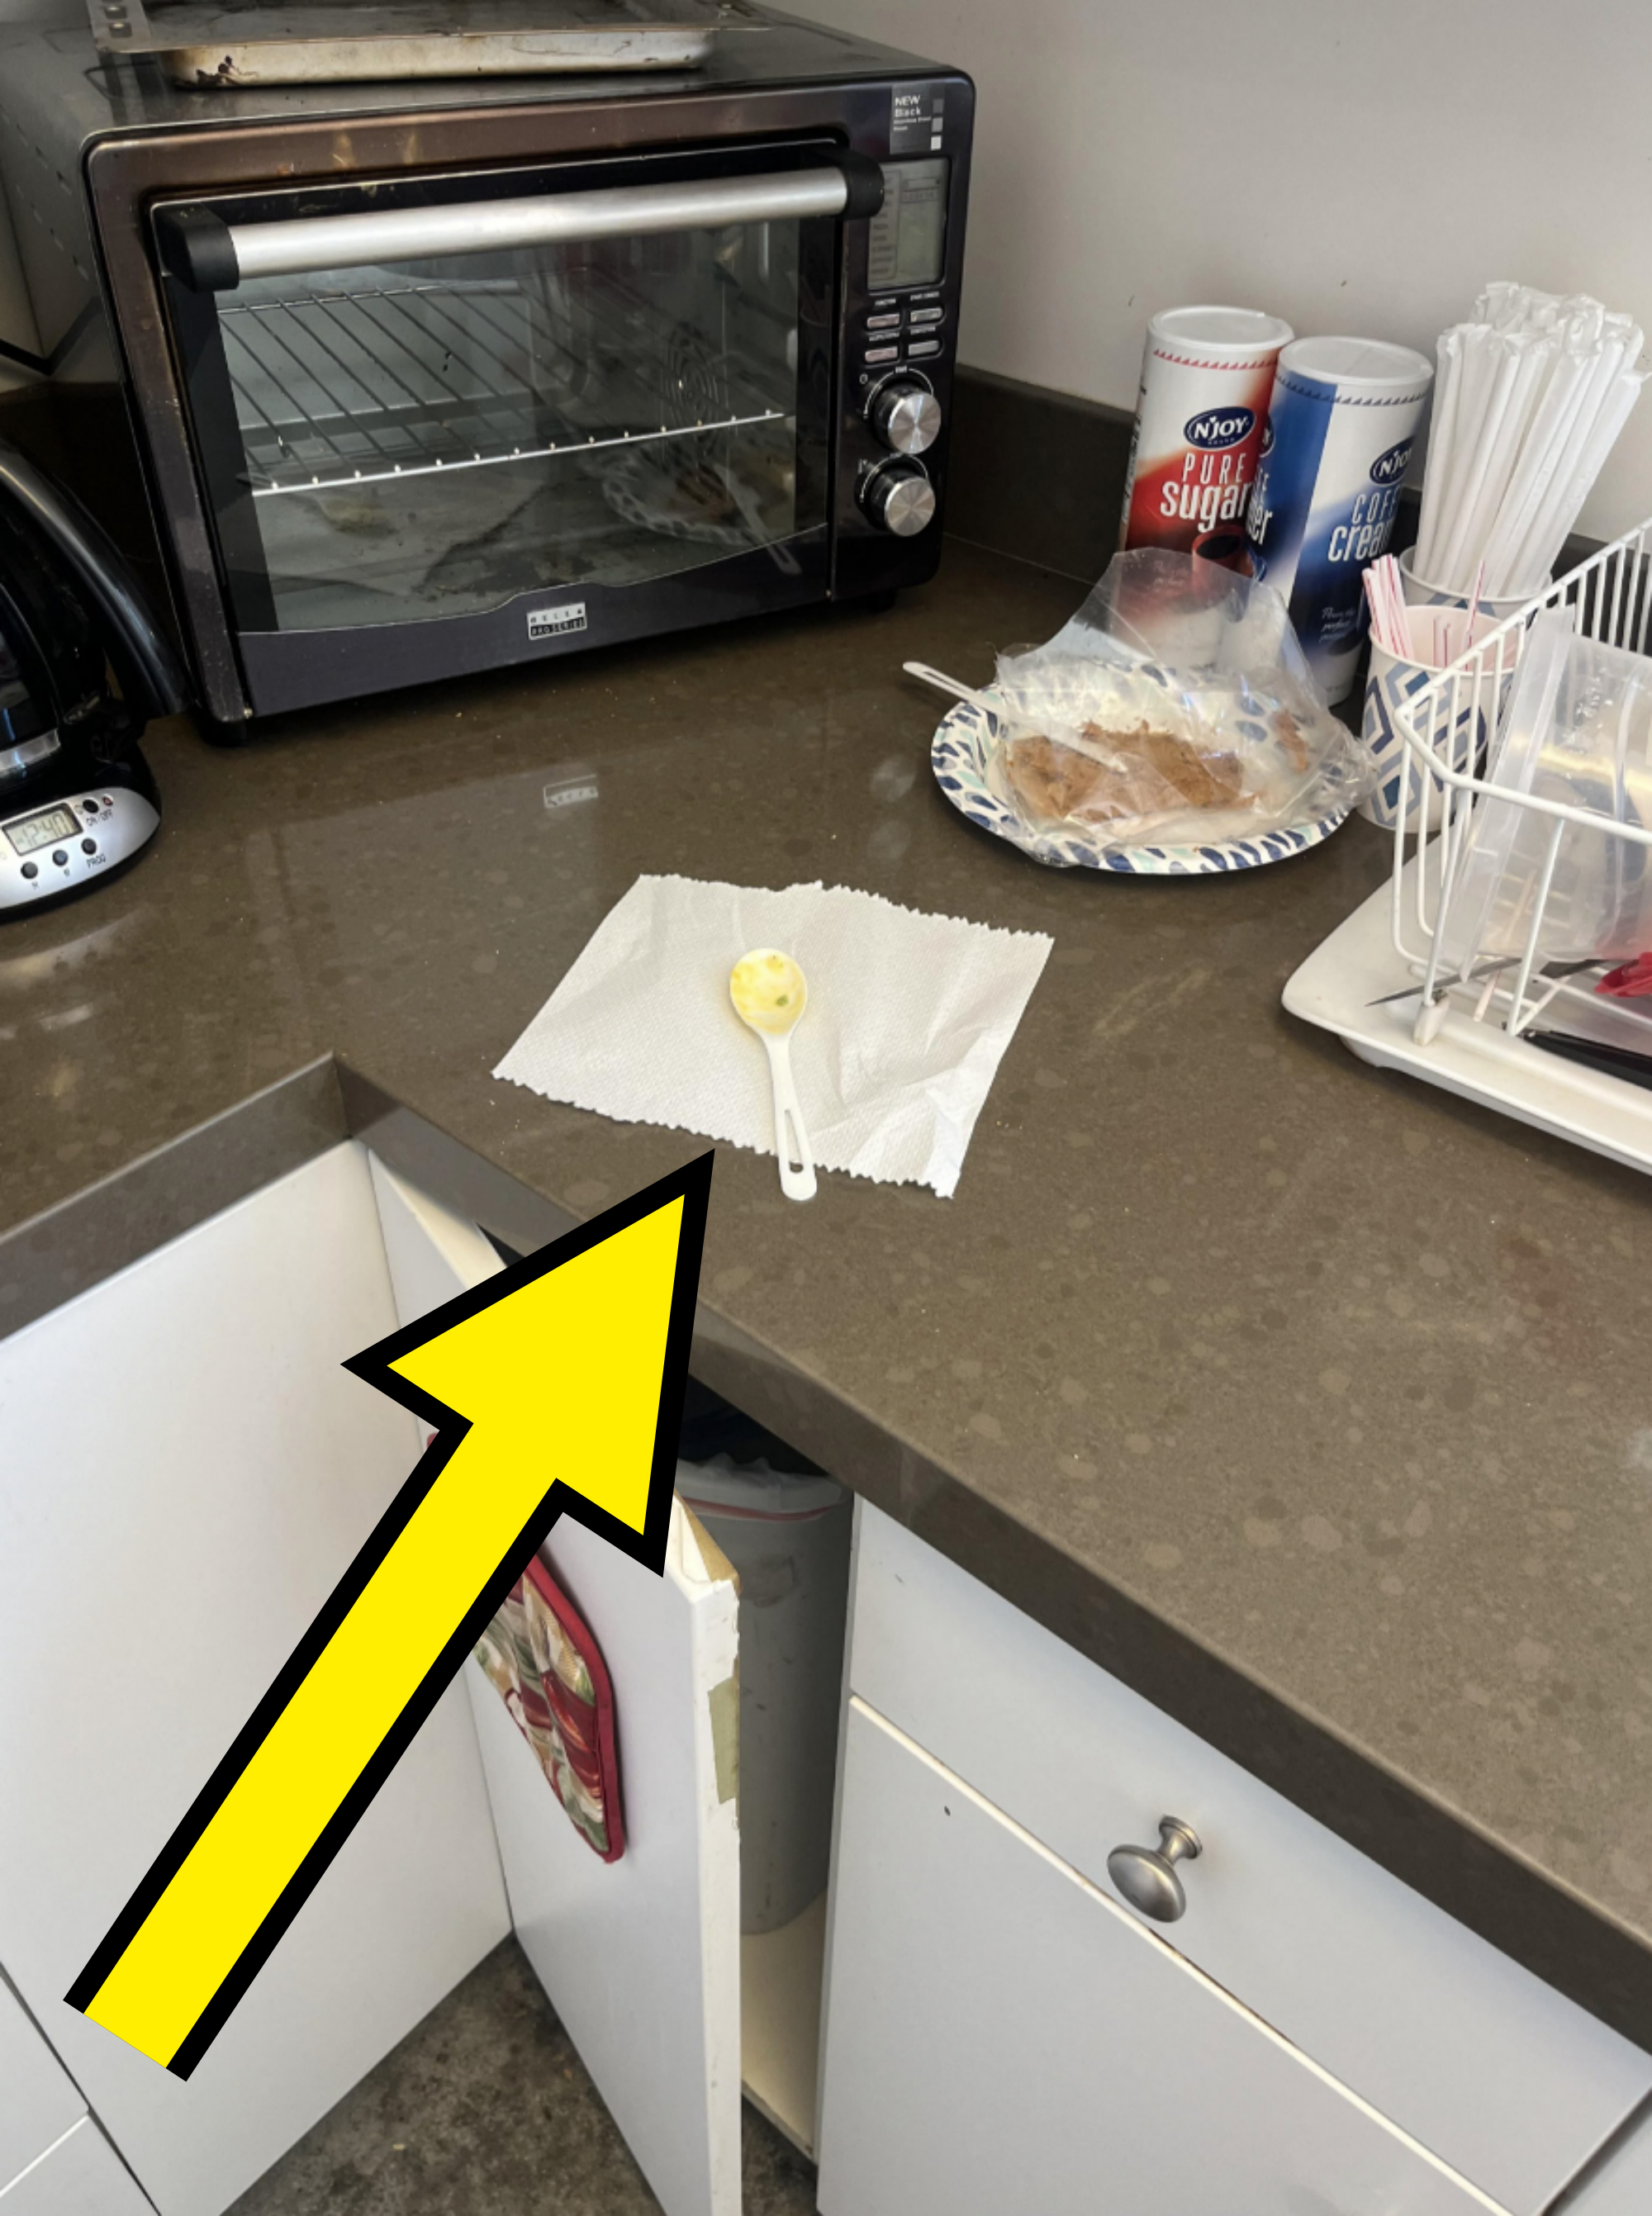 A used plastic spoon and paper towel have been left on the kitchen counter, directly above the open trash can